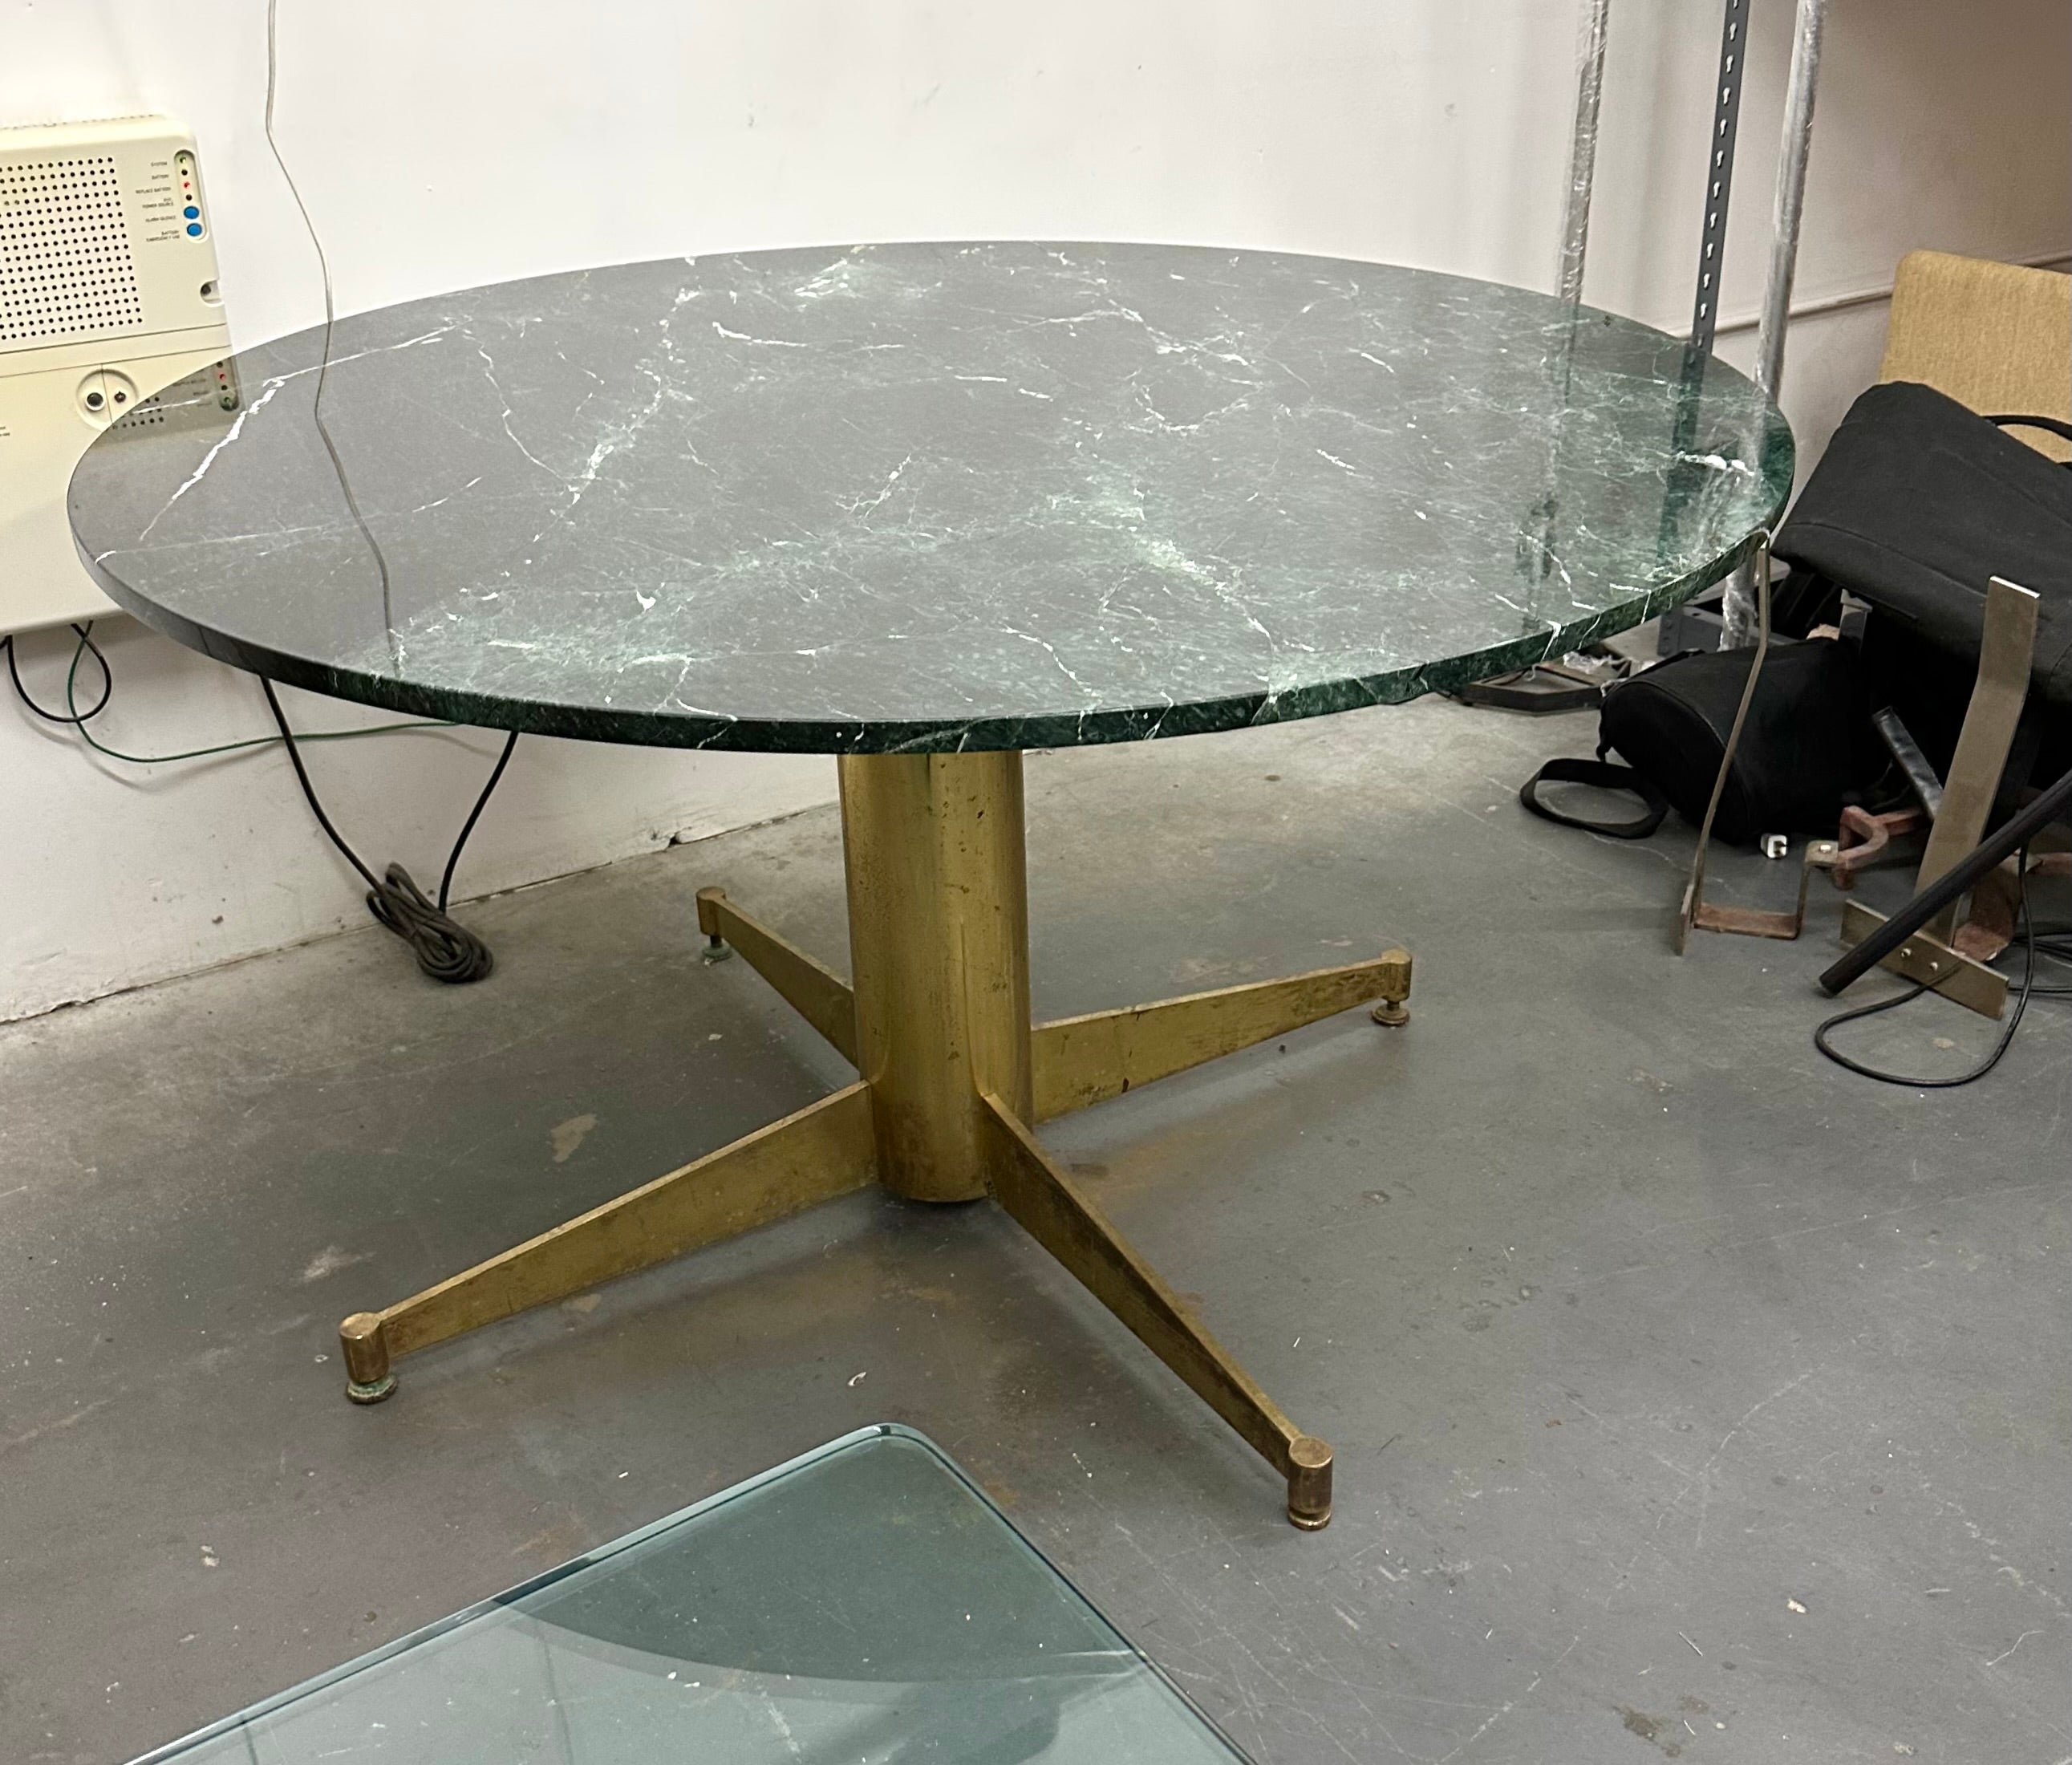 Handsome architectural dining or center table. 1” thick green marble top on a solid brass support with adjustable leveling feet. Super high build quality 